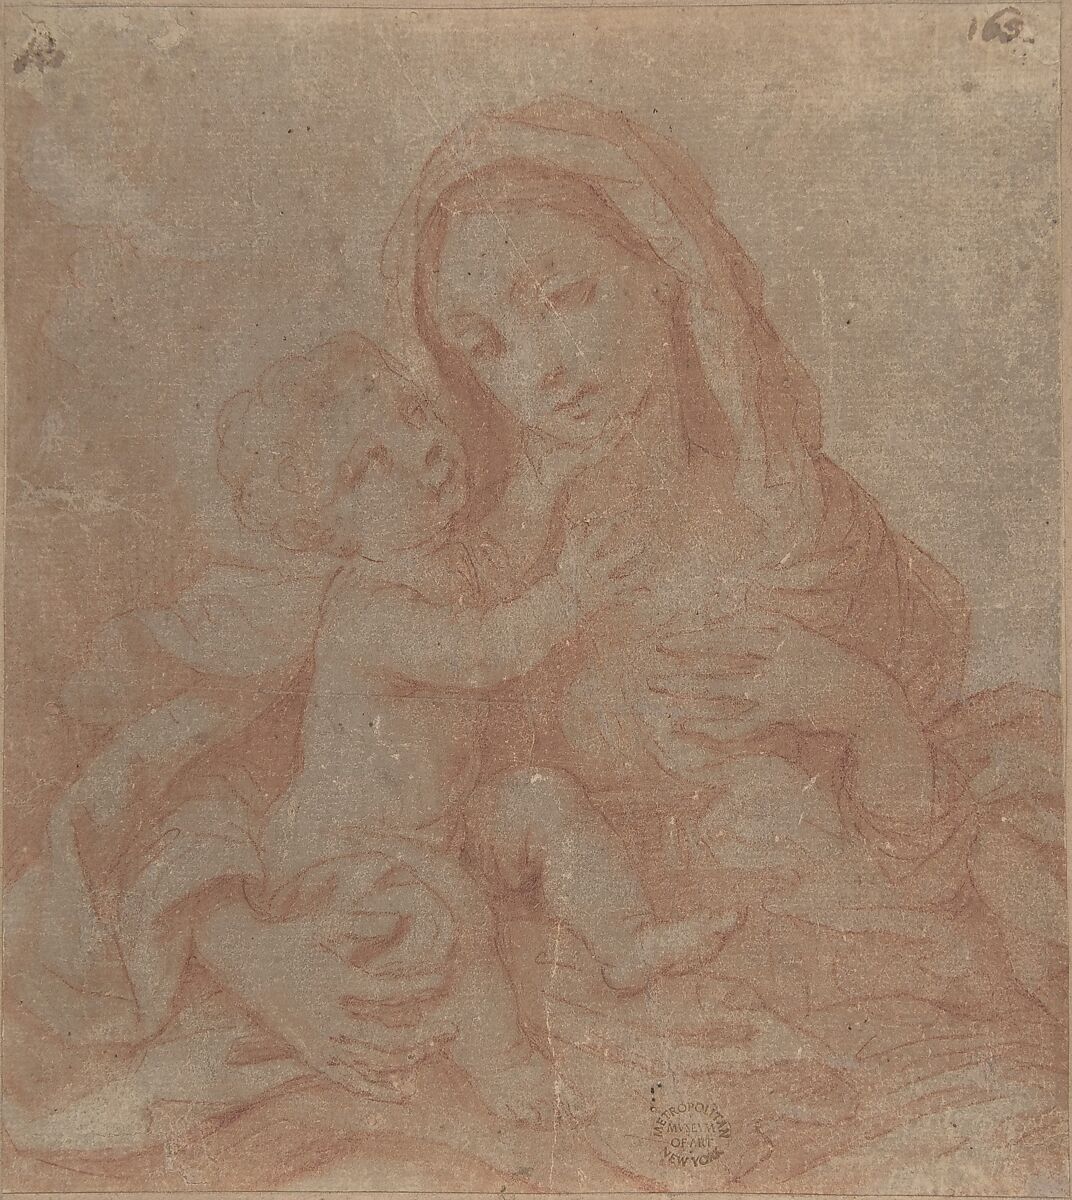 Madonna and Child, Anonymous, Italian, Roman-Bolognese, 17th century, Red chalk on cream paper, darkened to gray. Reworked counterproof? 